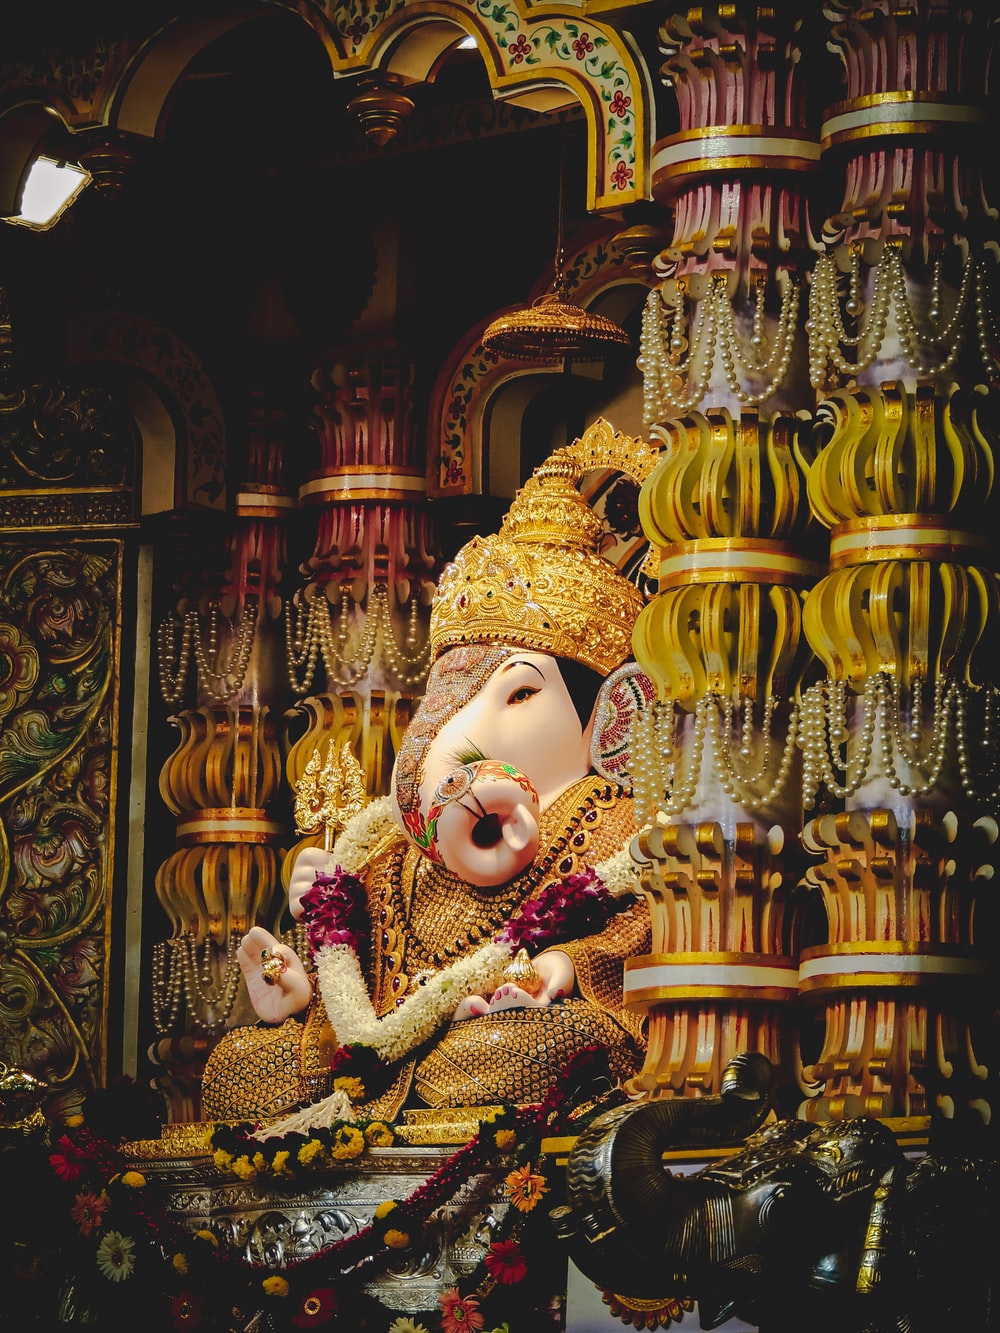 Ganesh Picture [HD]. Download Free Image